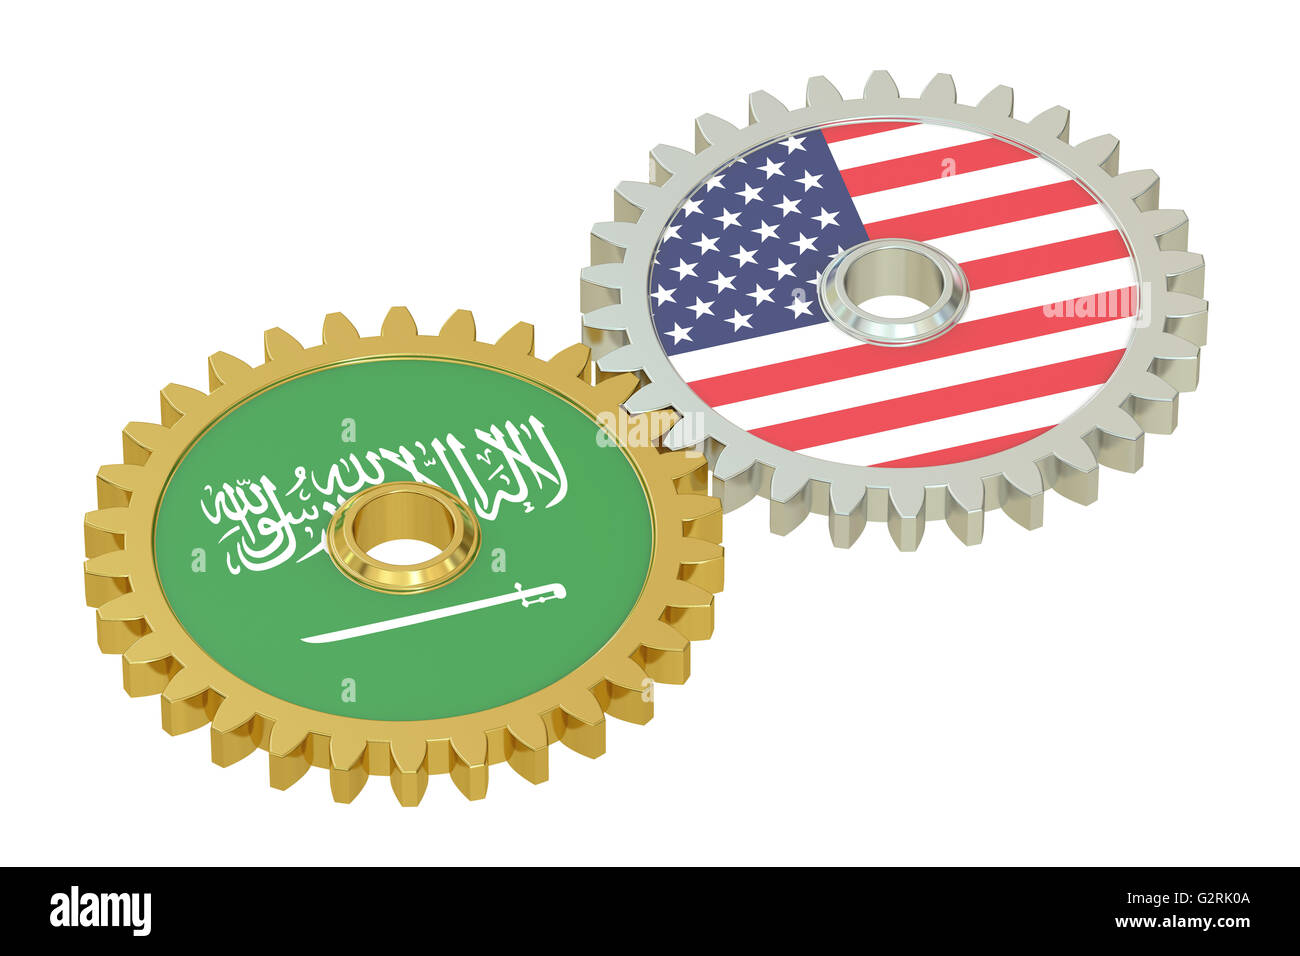 Saudi Arabia and United States relations concept, flags on a gears. 3D rendering isolated on white background Stock Photo